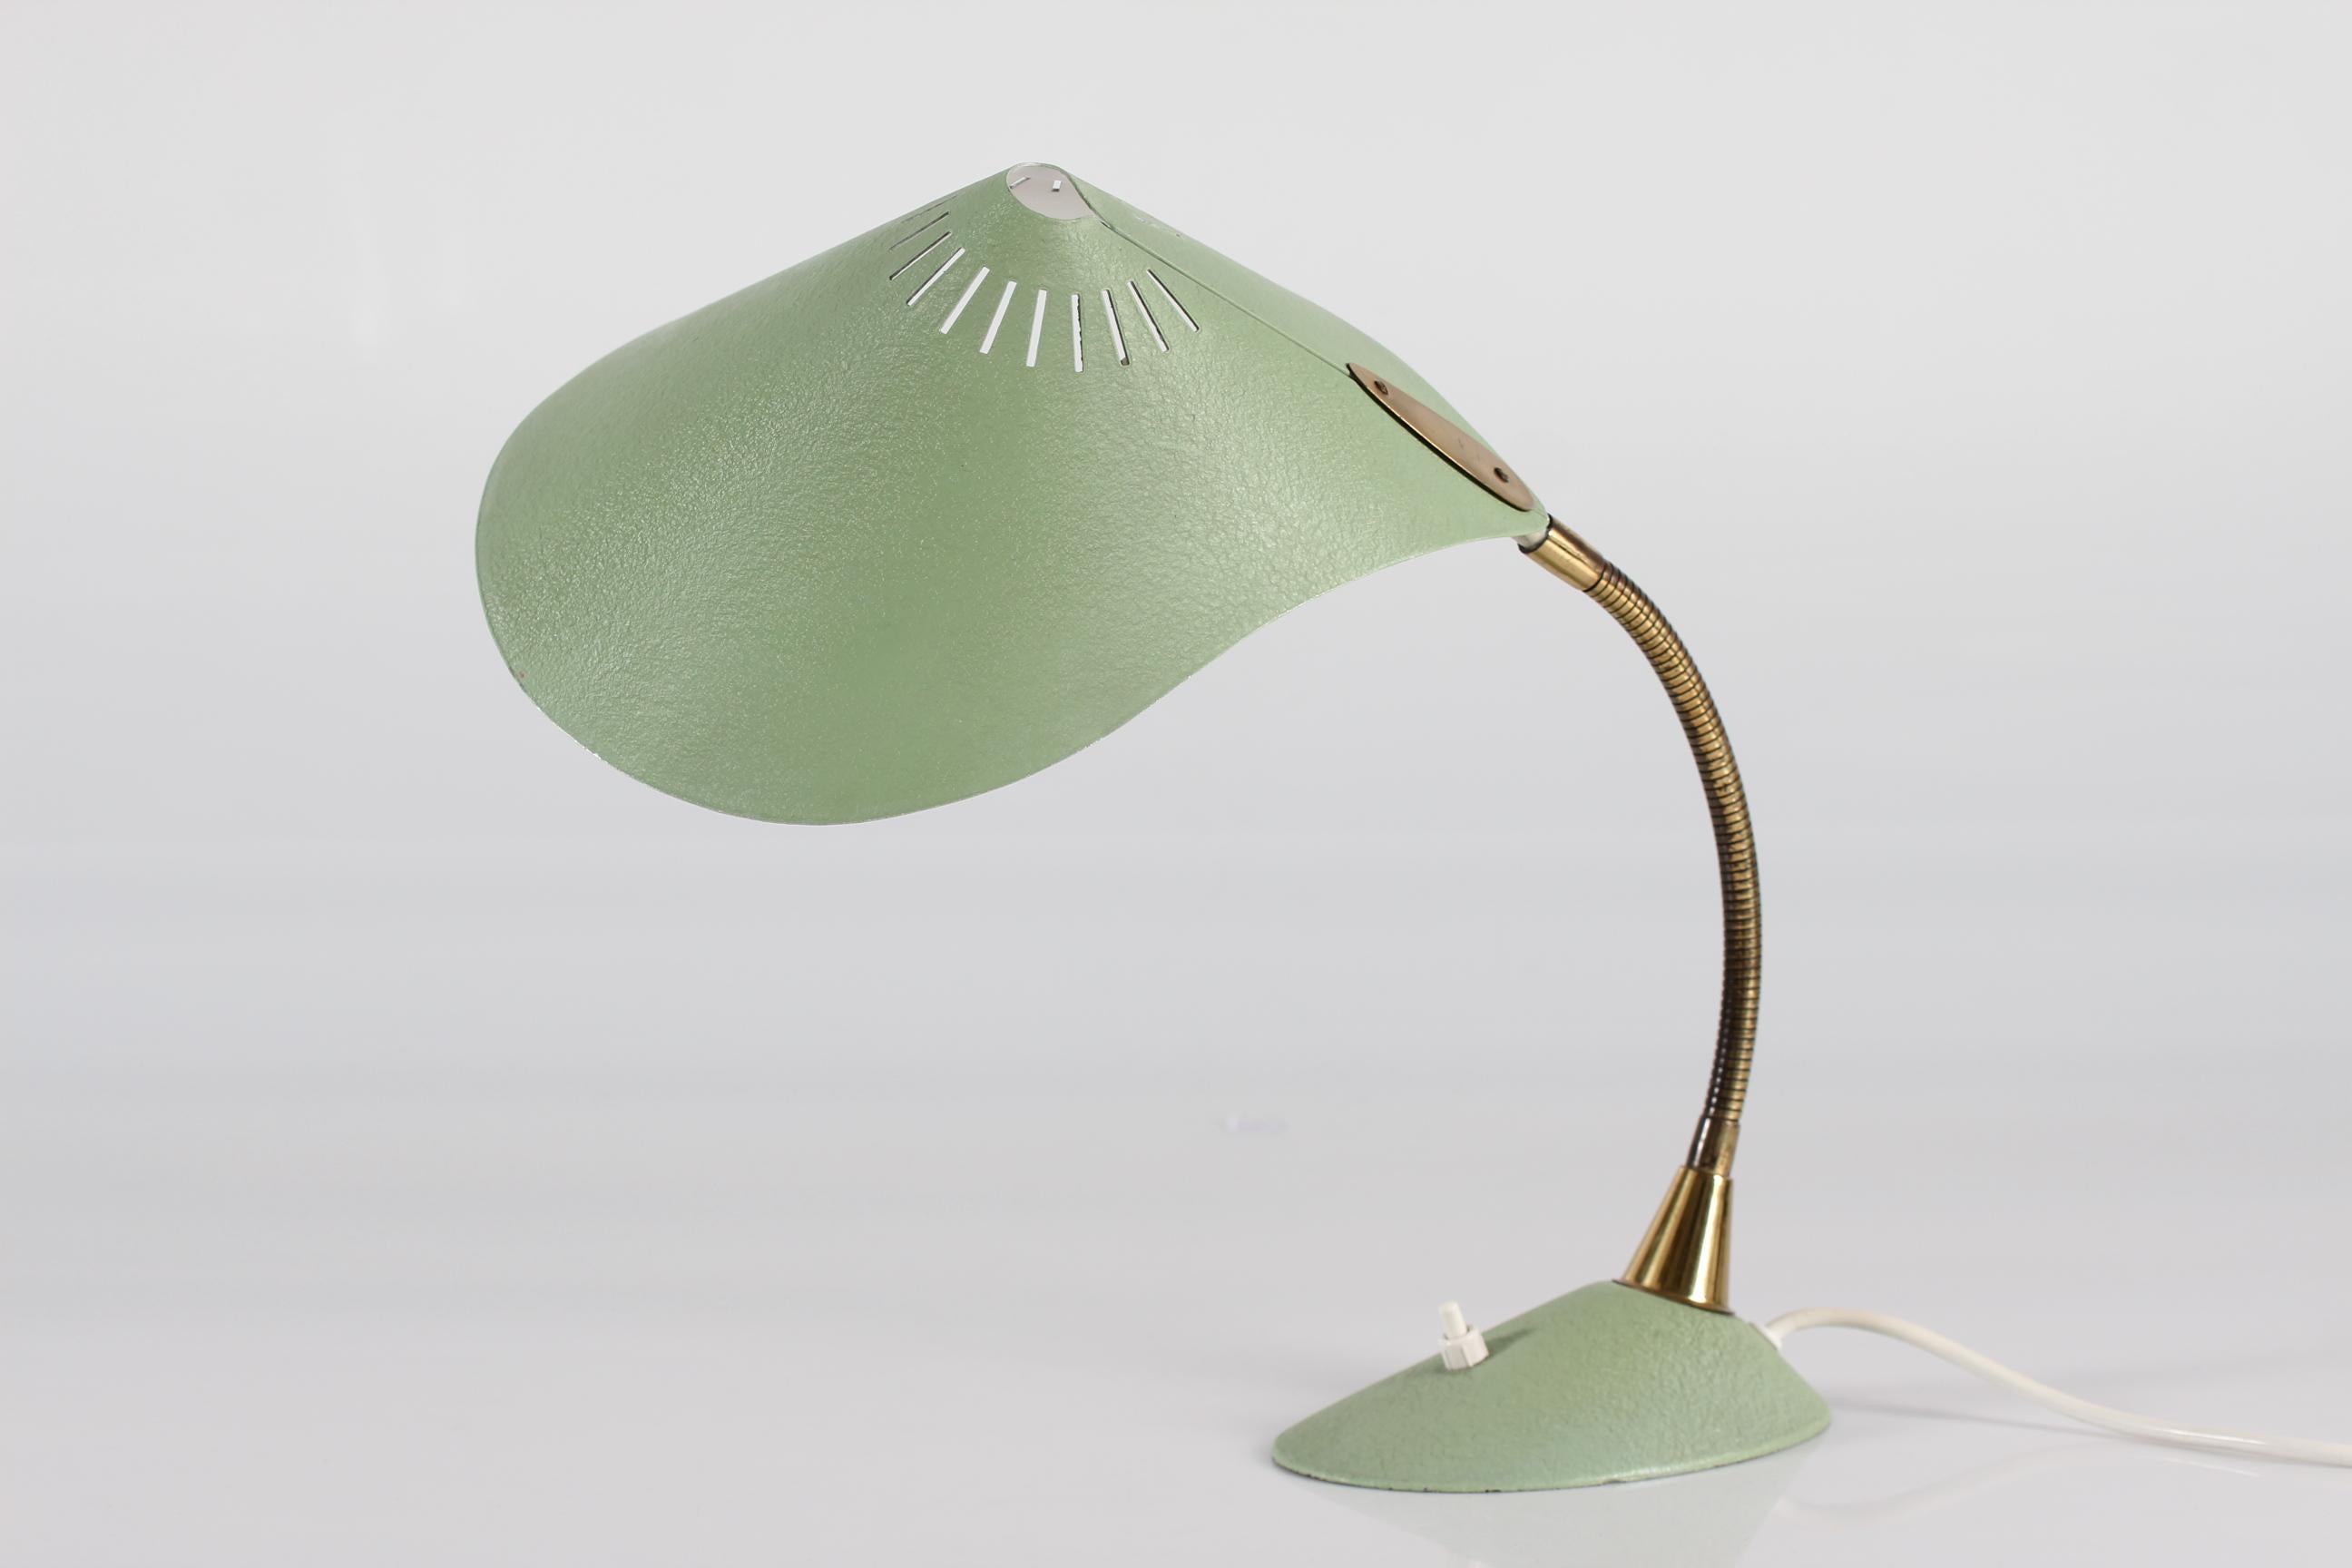 Stilnovo style Cobra desk lamp made of metal with pastel green lacquer and openwork lace shade and brass arm.
It has a gooseneck arm which is adjustable in all kind of directions.

Manufactured by the German company Cosack Leuchten in the